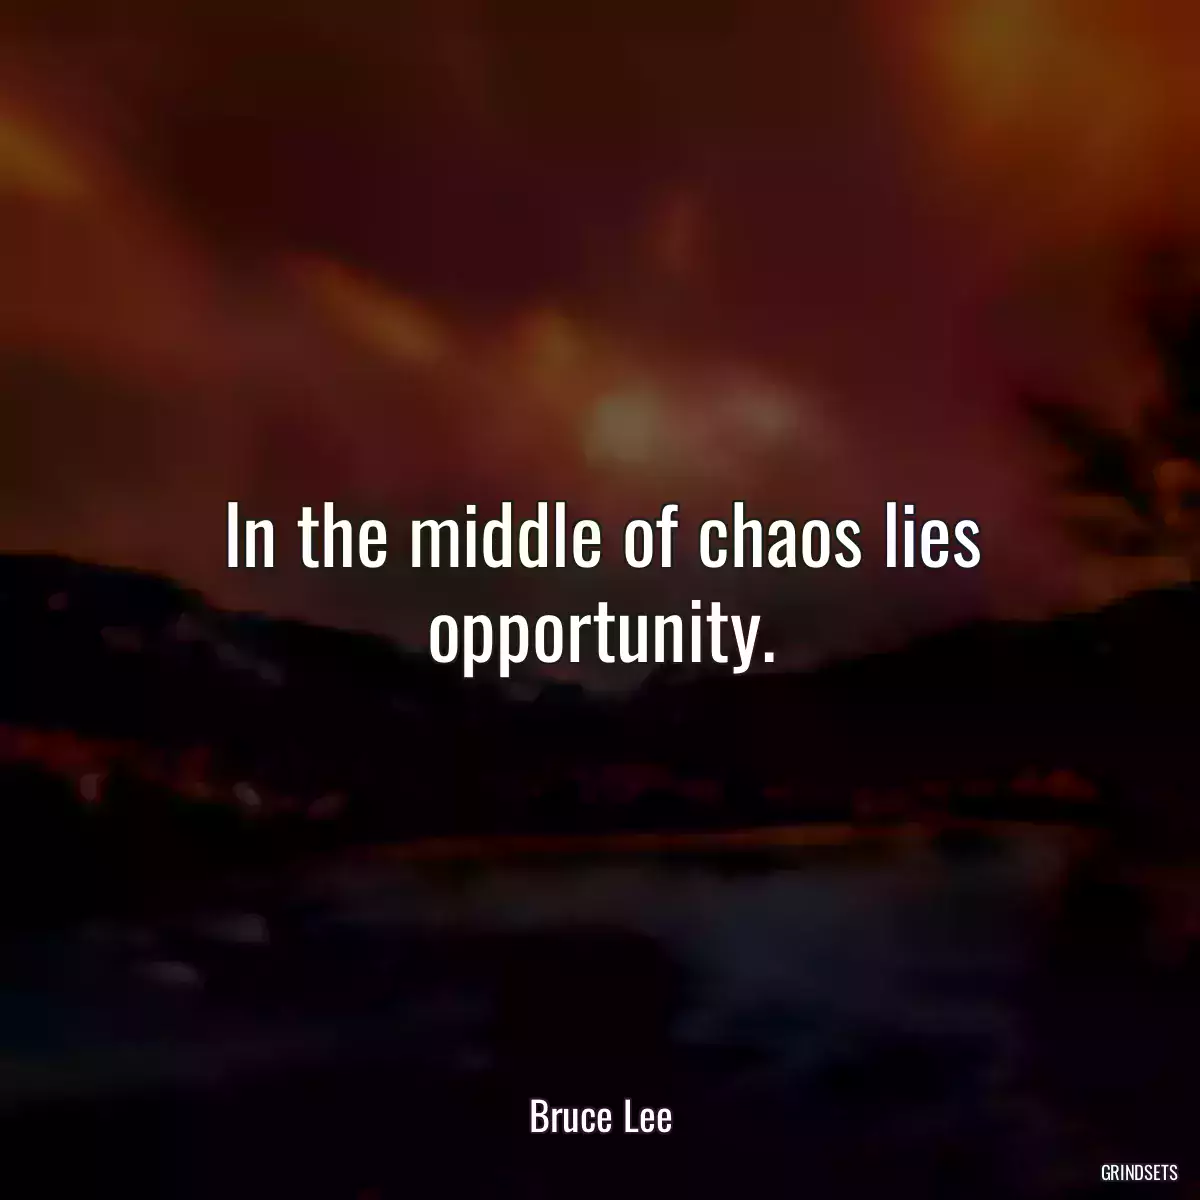 In the middle of chaos lies opportunity.